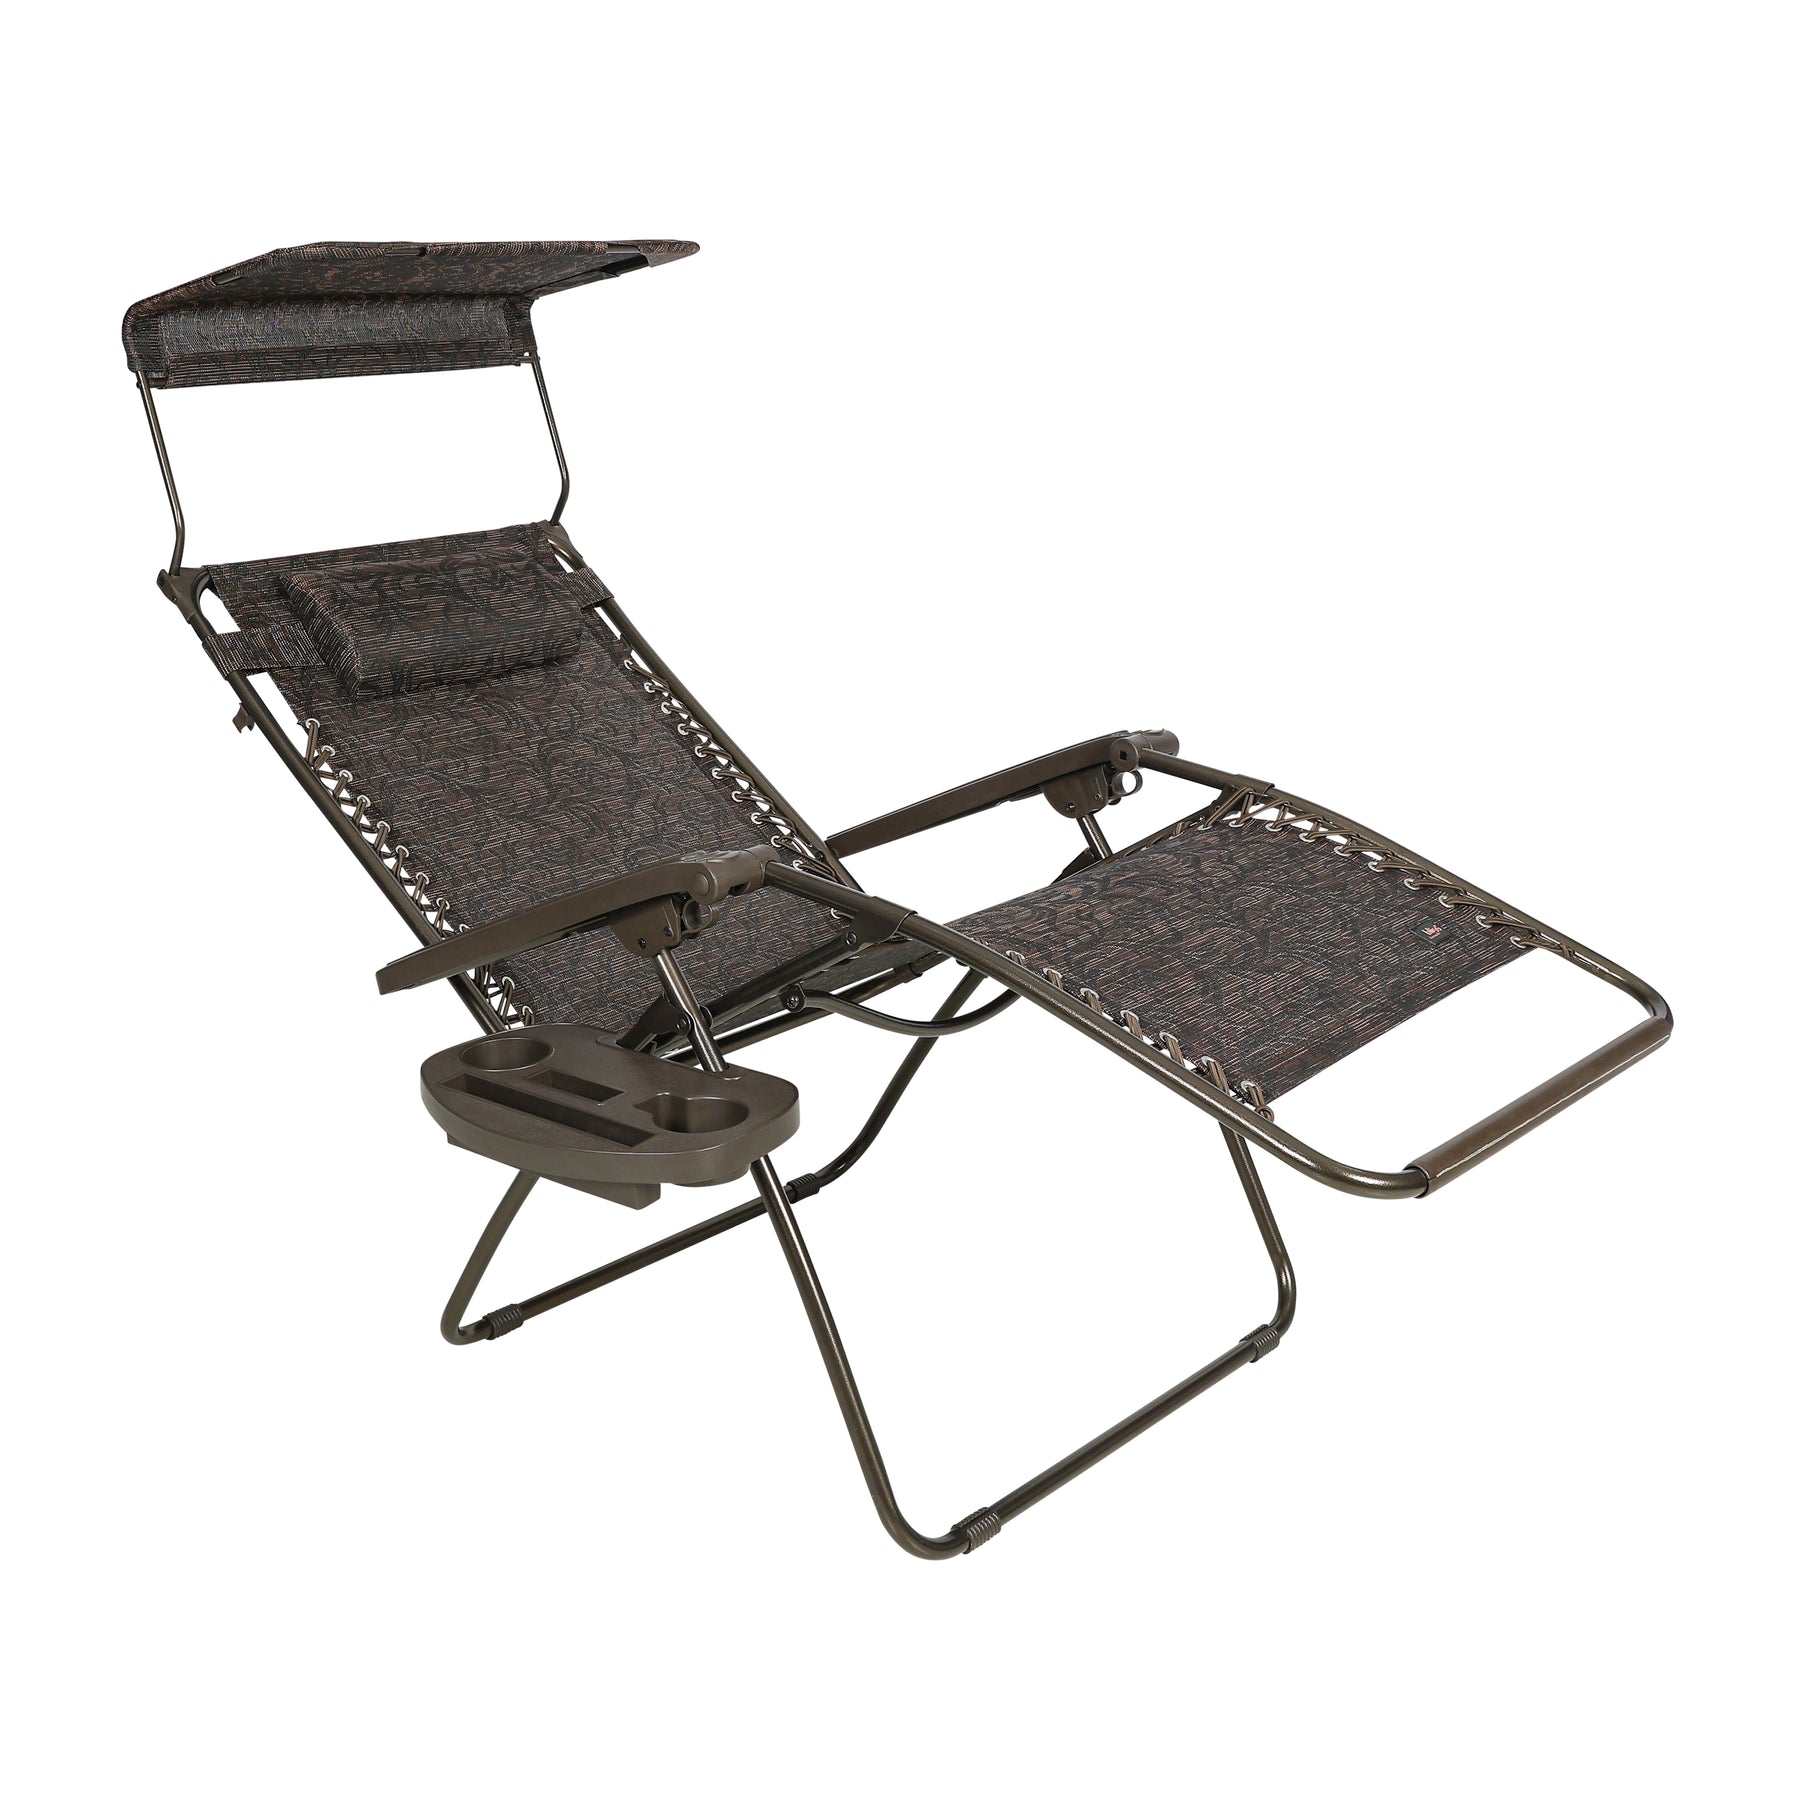 Angled view of a reclined Bliss Hammocks 30-inch Wide XL Zero Gravity Chair with Adjustable Canopy Sun-Shade, Drink Tray, and Adjustable Pillow in the brown jacquard variation.